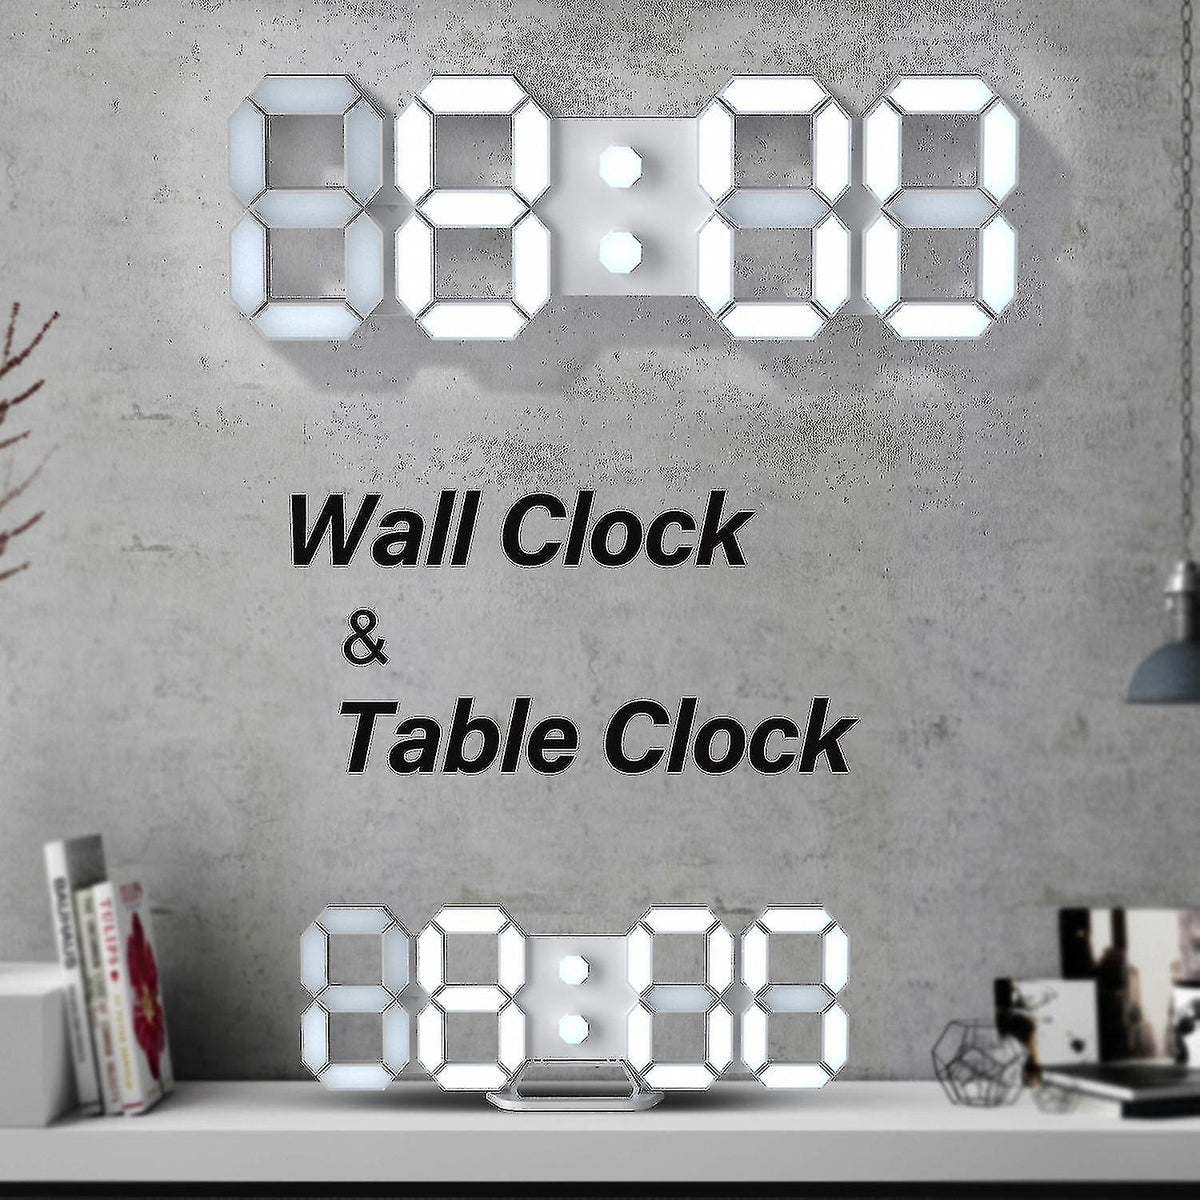 3D LED Digital Clock Snooze Bedroom Desk Alarm Clocks Hanging Wall Clock Calendar Thermometer Voice Control Backlight Time Temperature Display For Bedroom Office Living Room Home Decor Gift